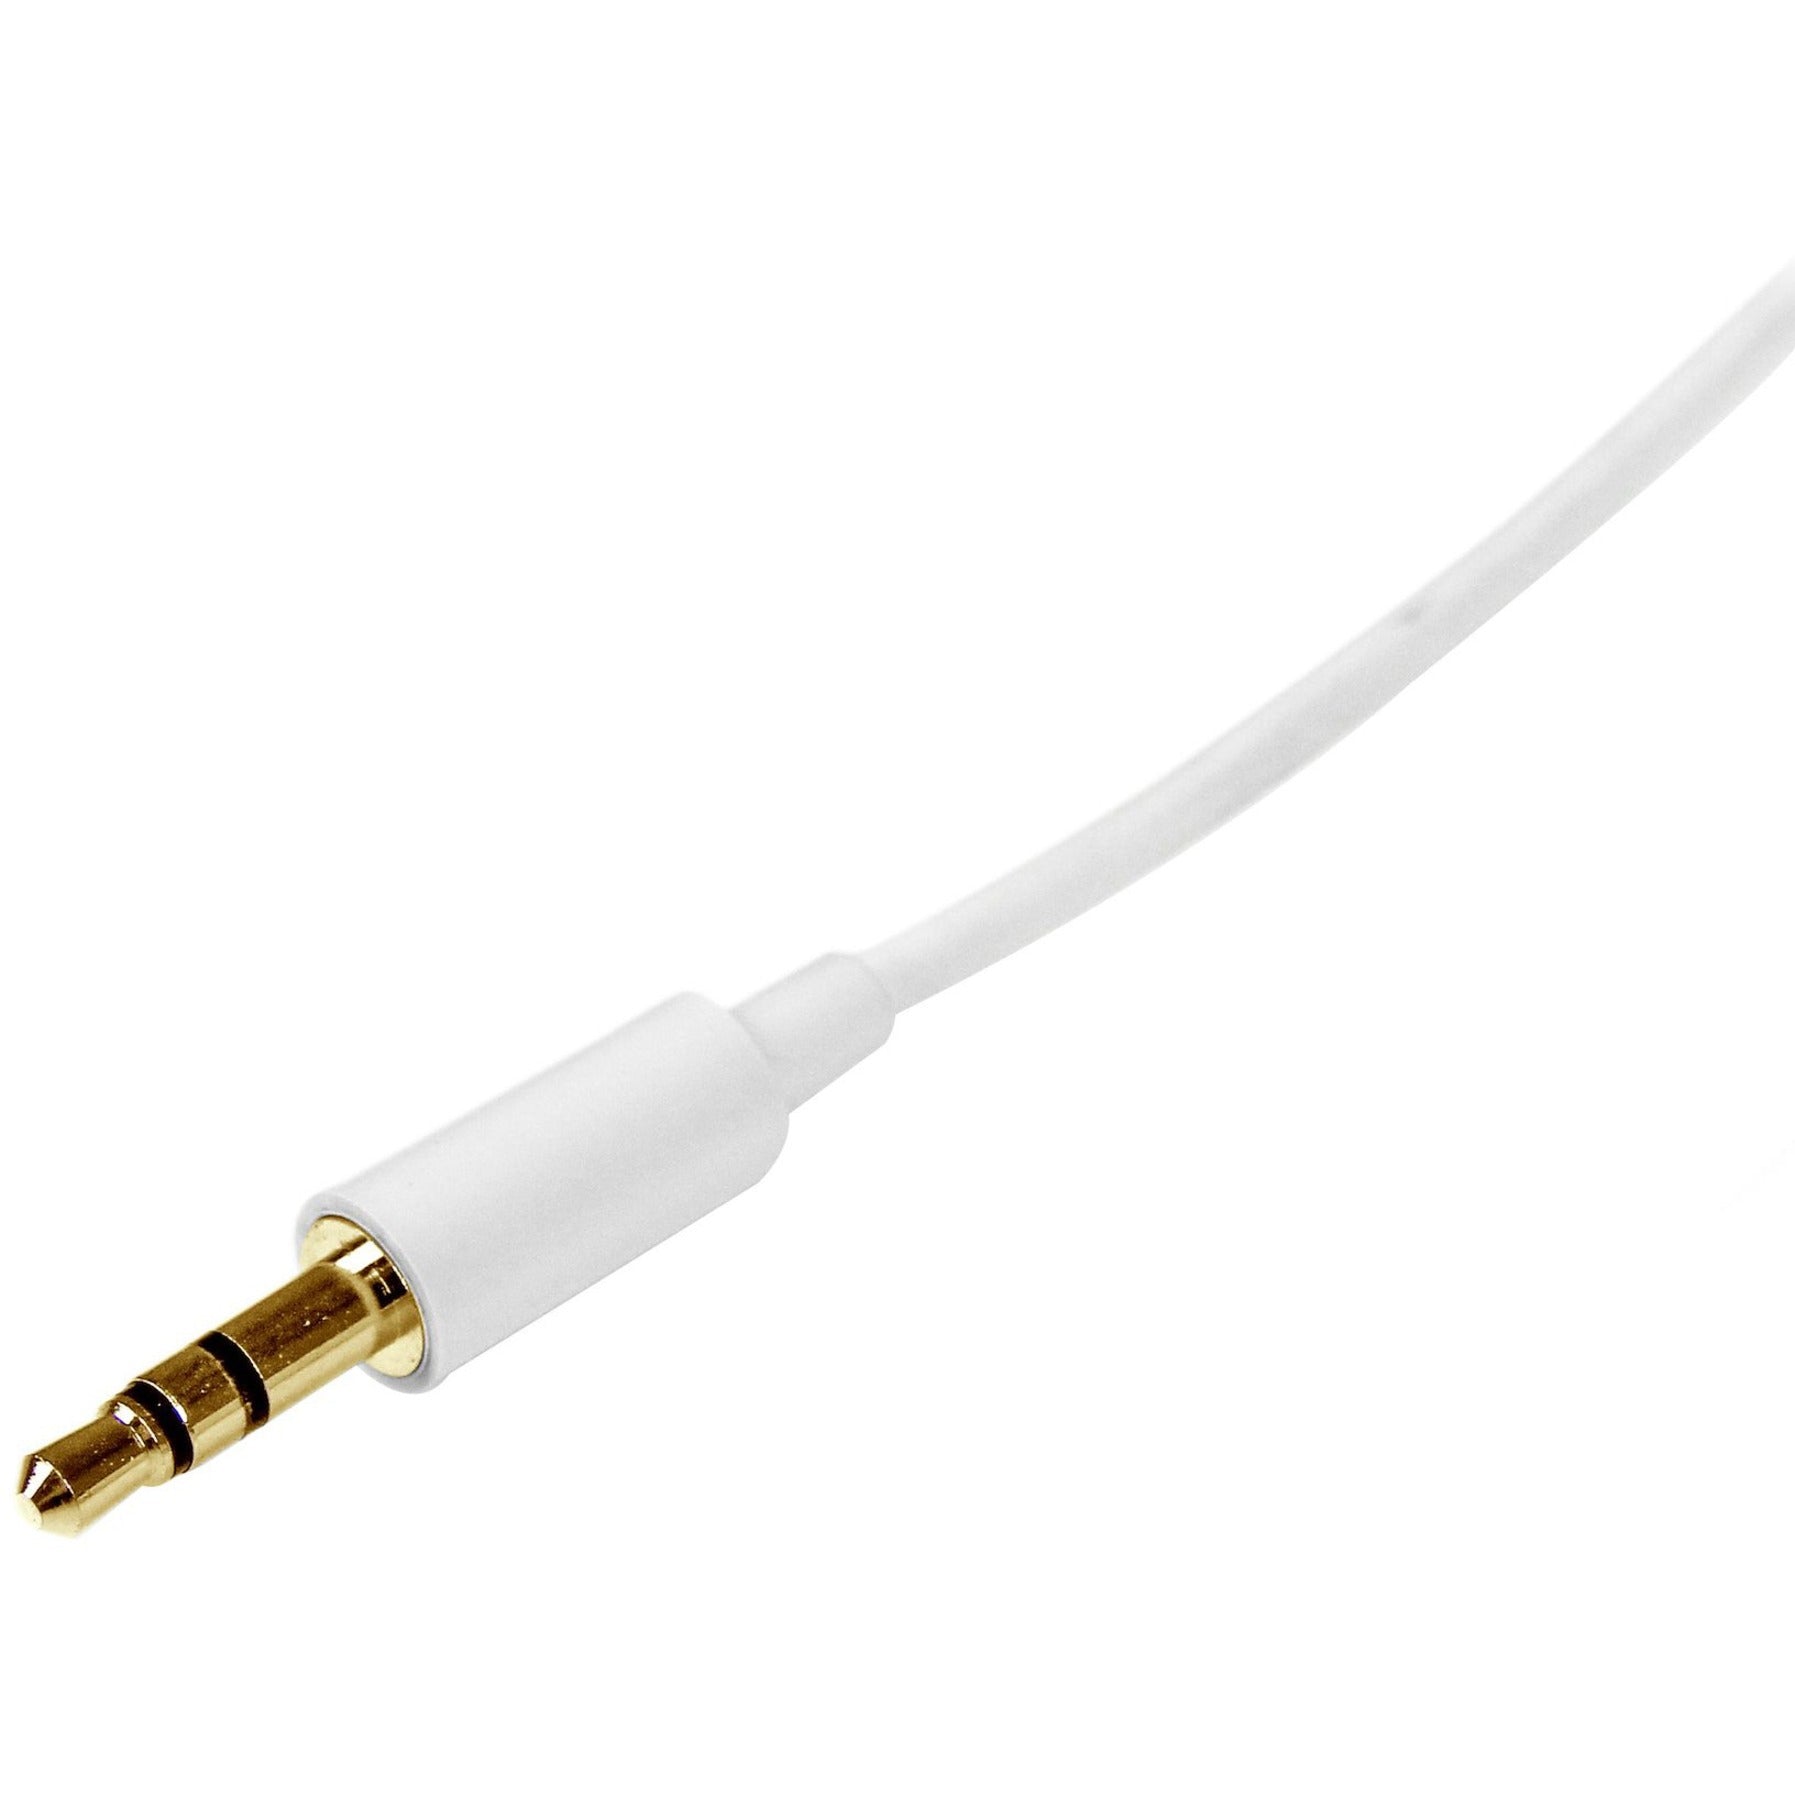 StarTech.com MU2MMMSWH 2m White Slim 3.5mm Stereo Audio Cable - Male to Male, Molded, Copper Conductor, Nickel Plated Connectors